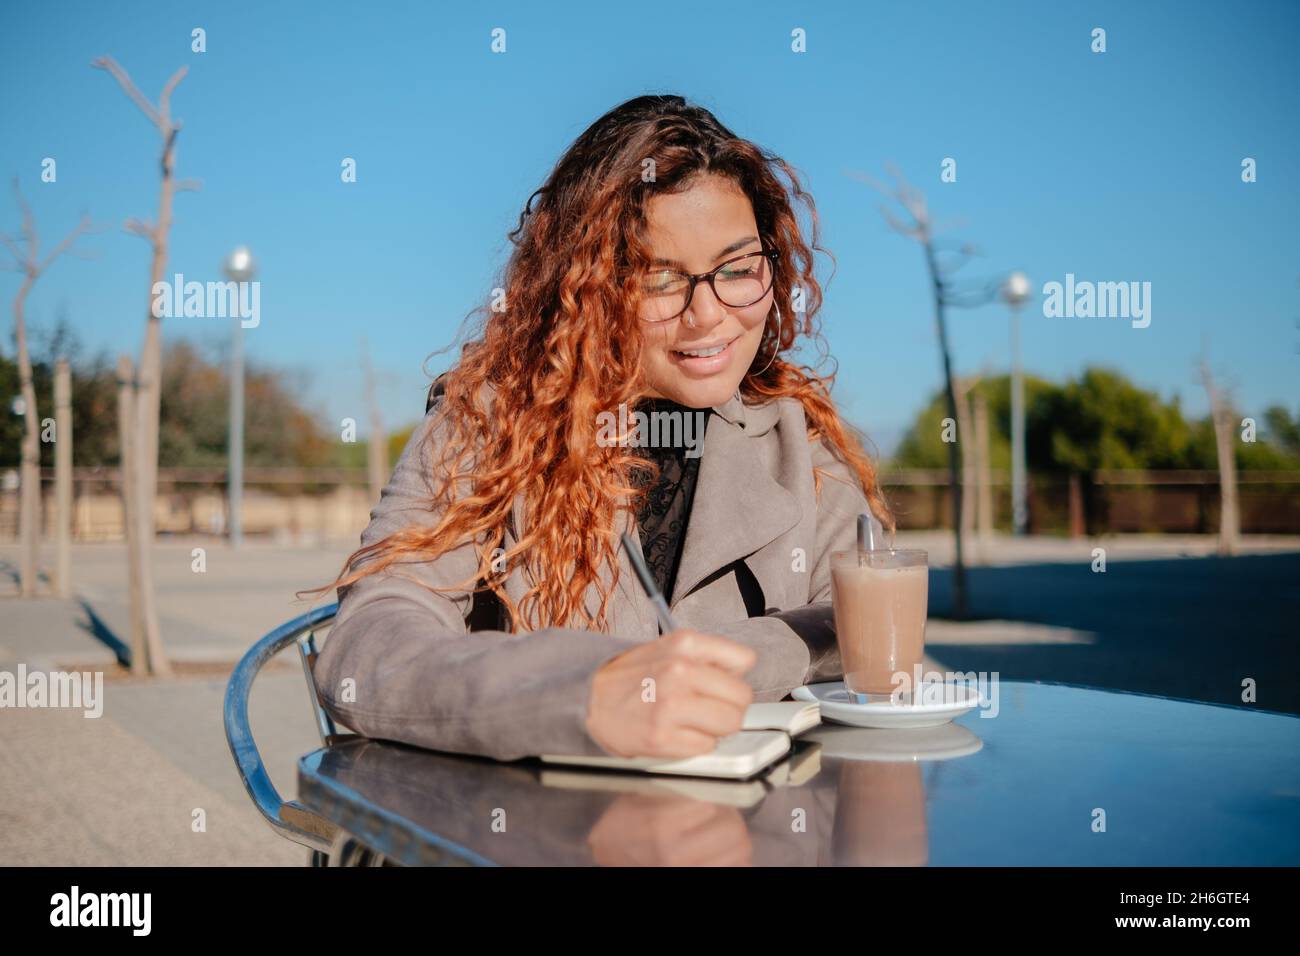 beautiful latin girl drinking a cup of coffee and watching the mobile phone, on a metal table outdoors Stock Photo